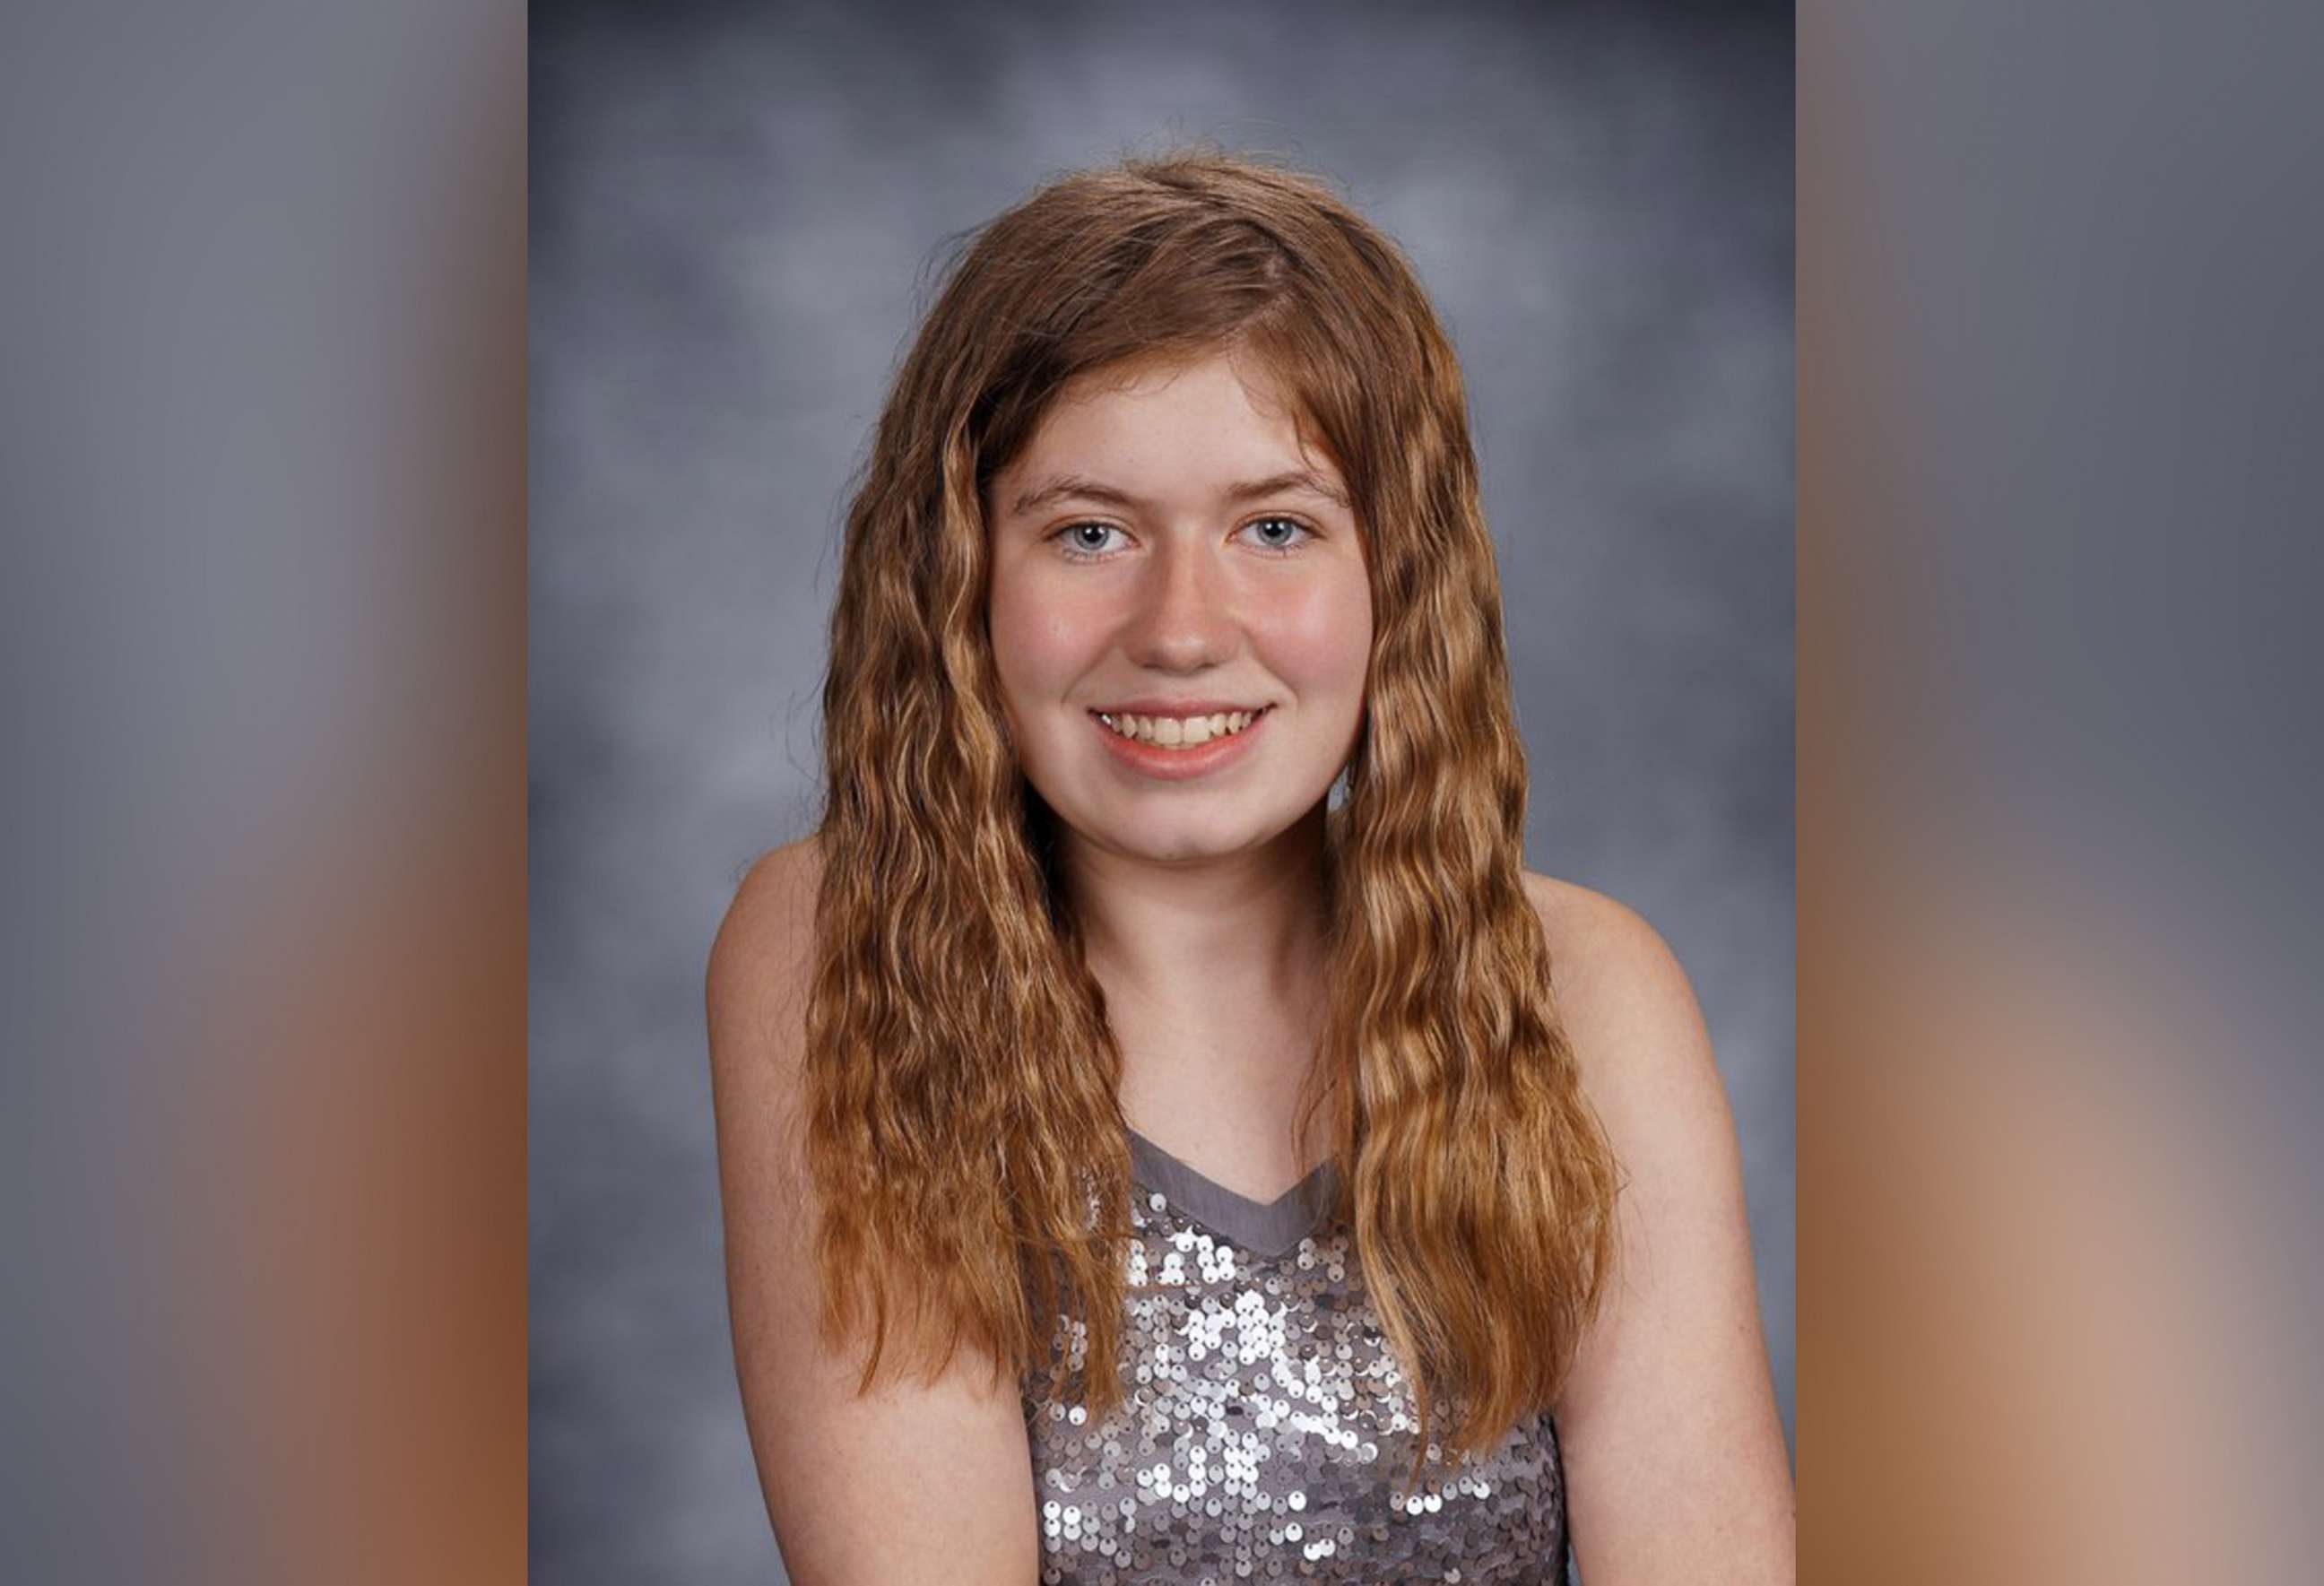 PHOTO: An undated handout photo made available by the FBI shows 13-year-old Jayme Closs, who was reported missing from Barron, Wis., since October 2018.